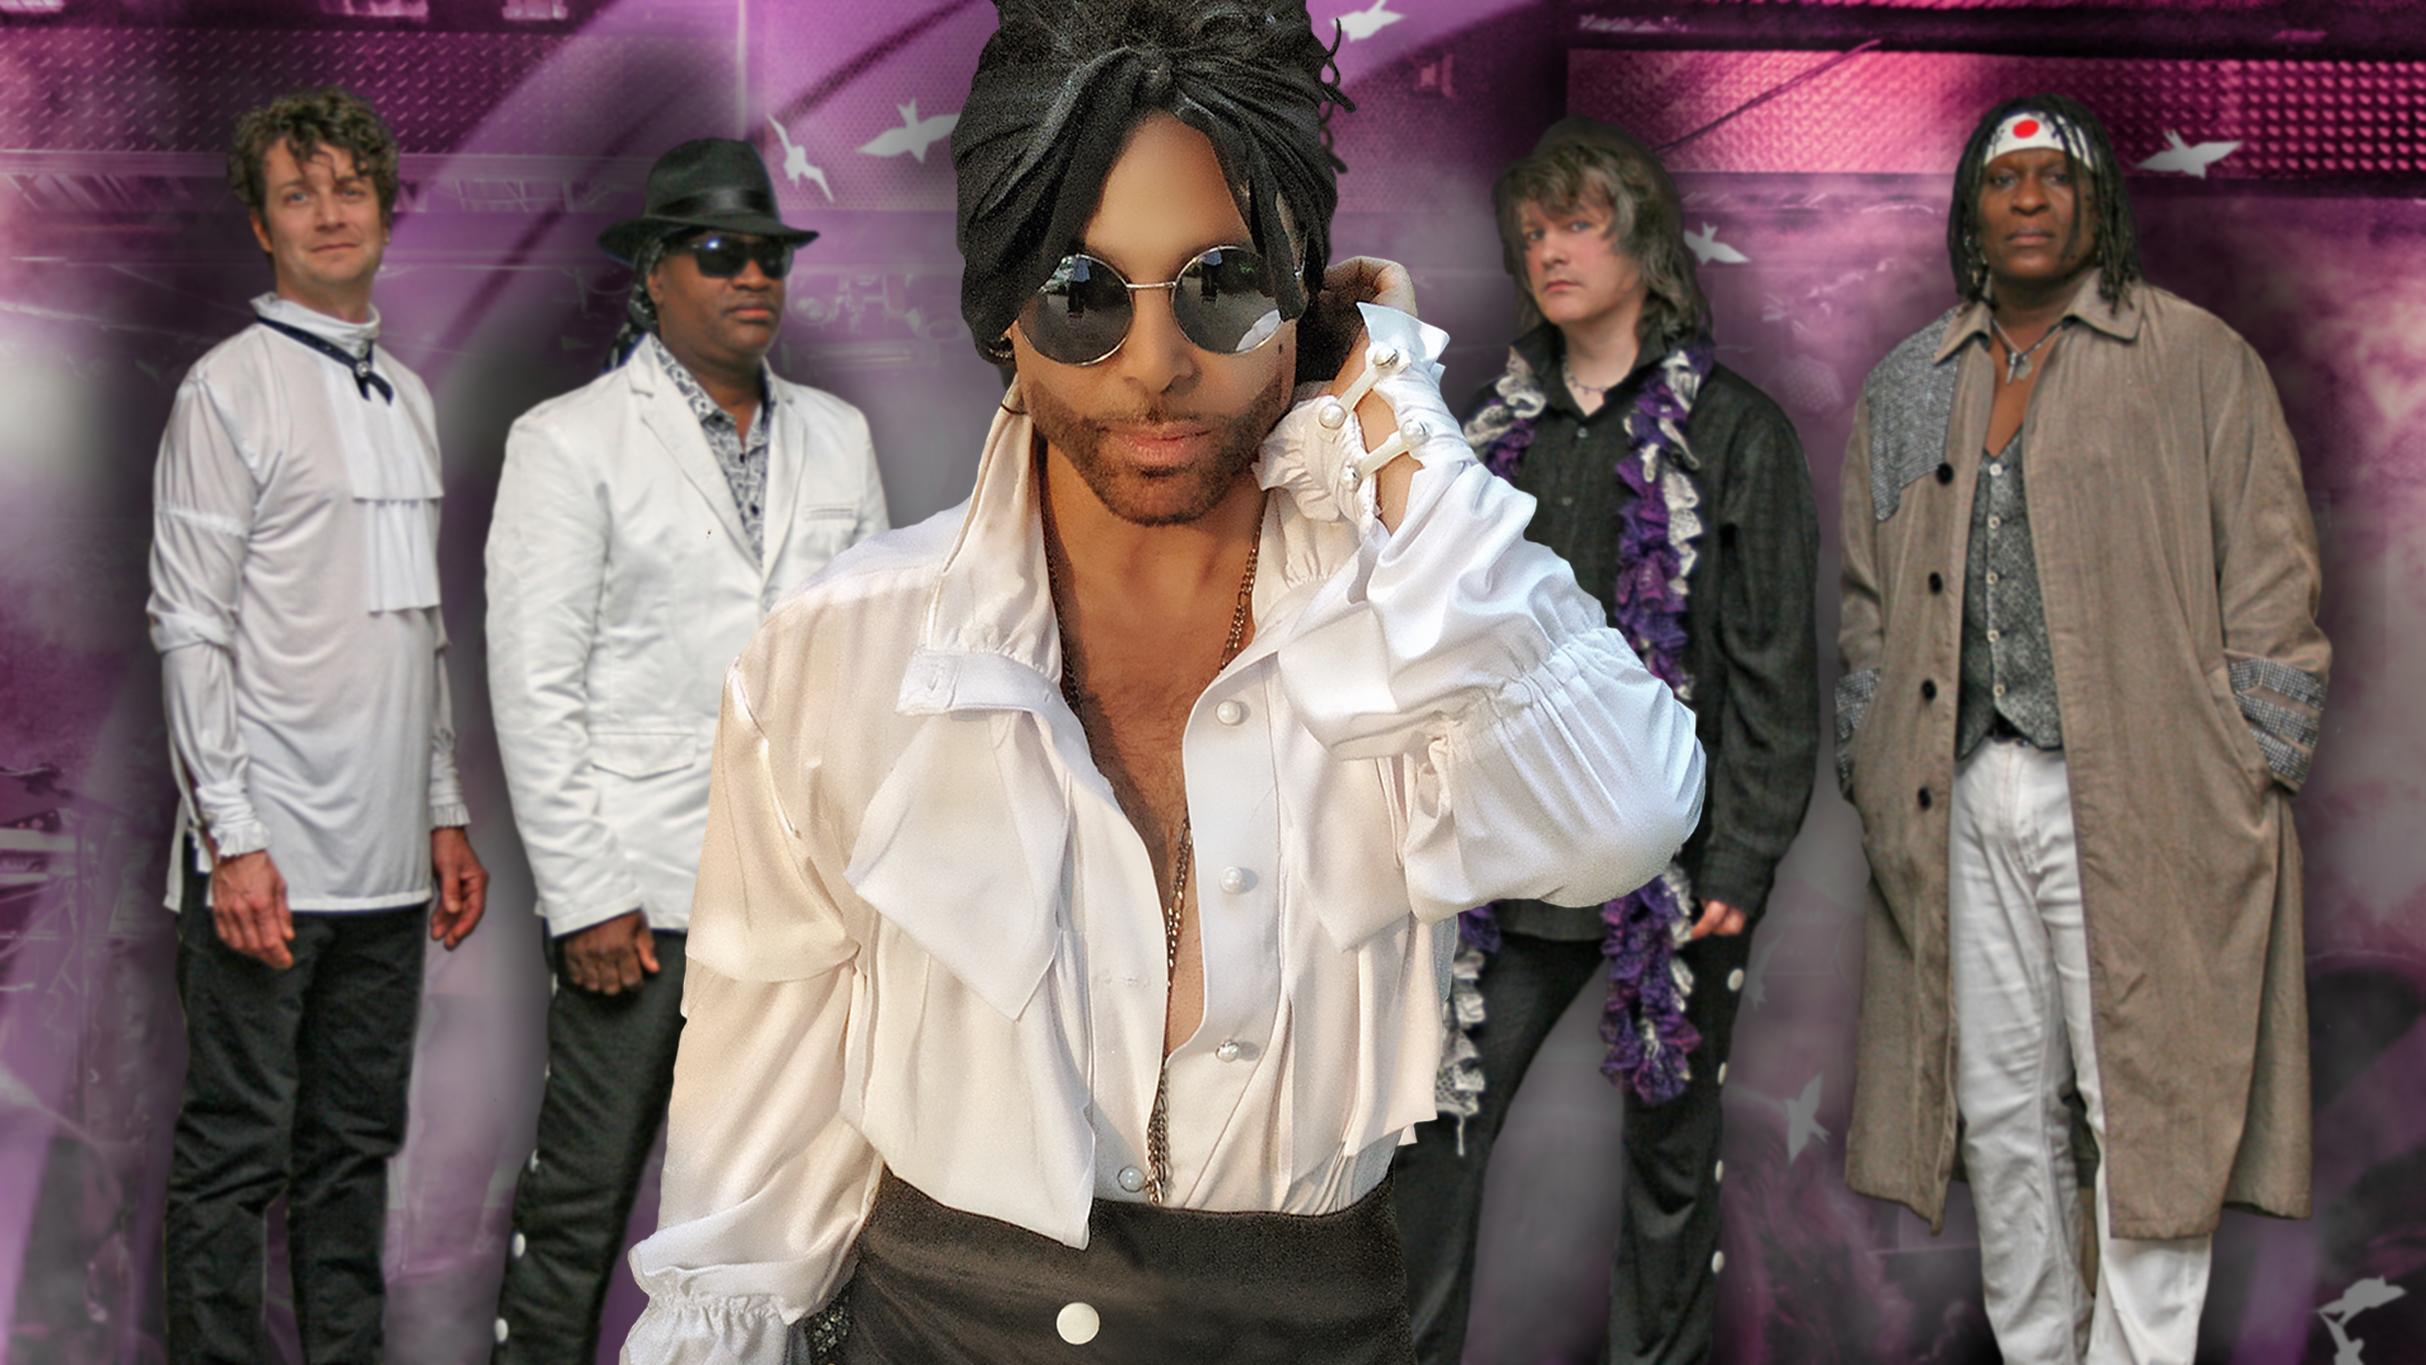 The Purple xPeRIeNCE The Premier Prince Tribute